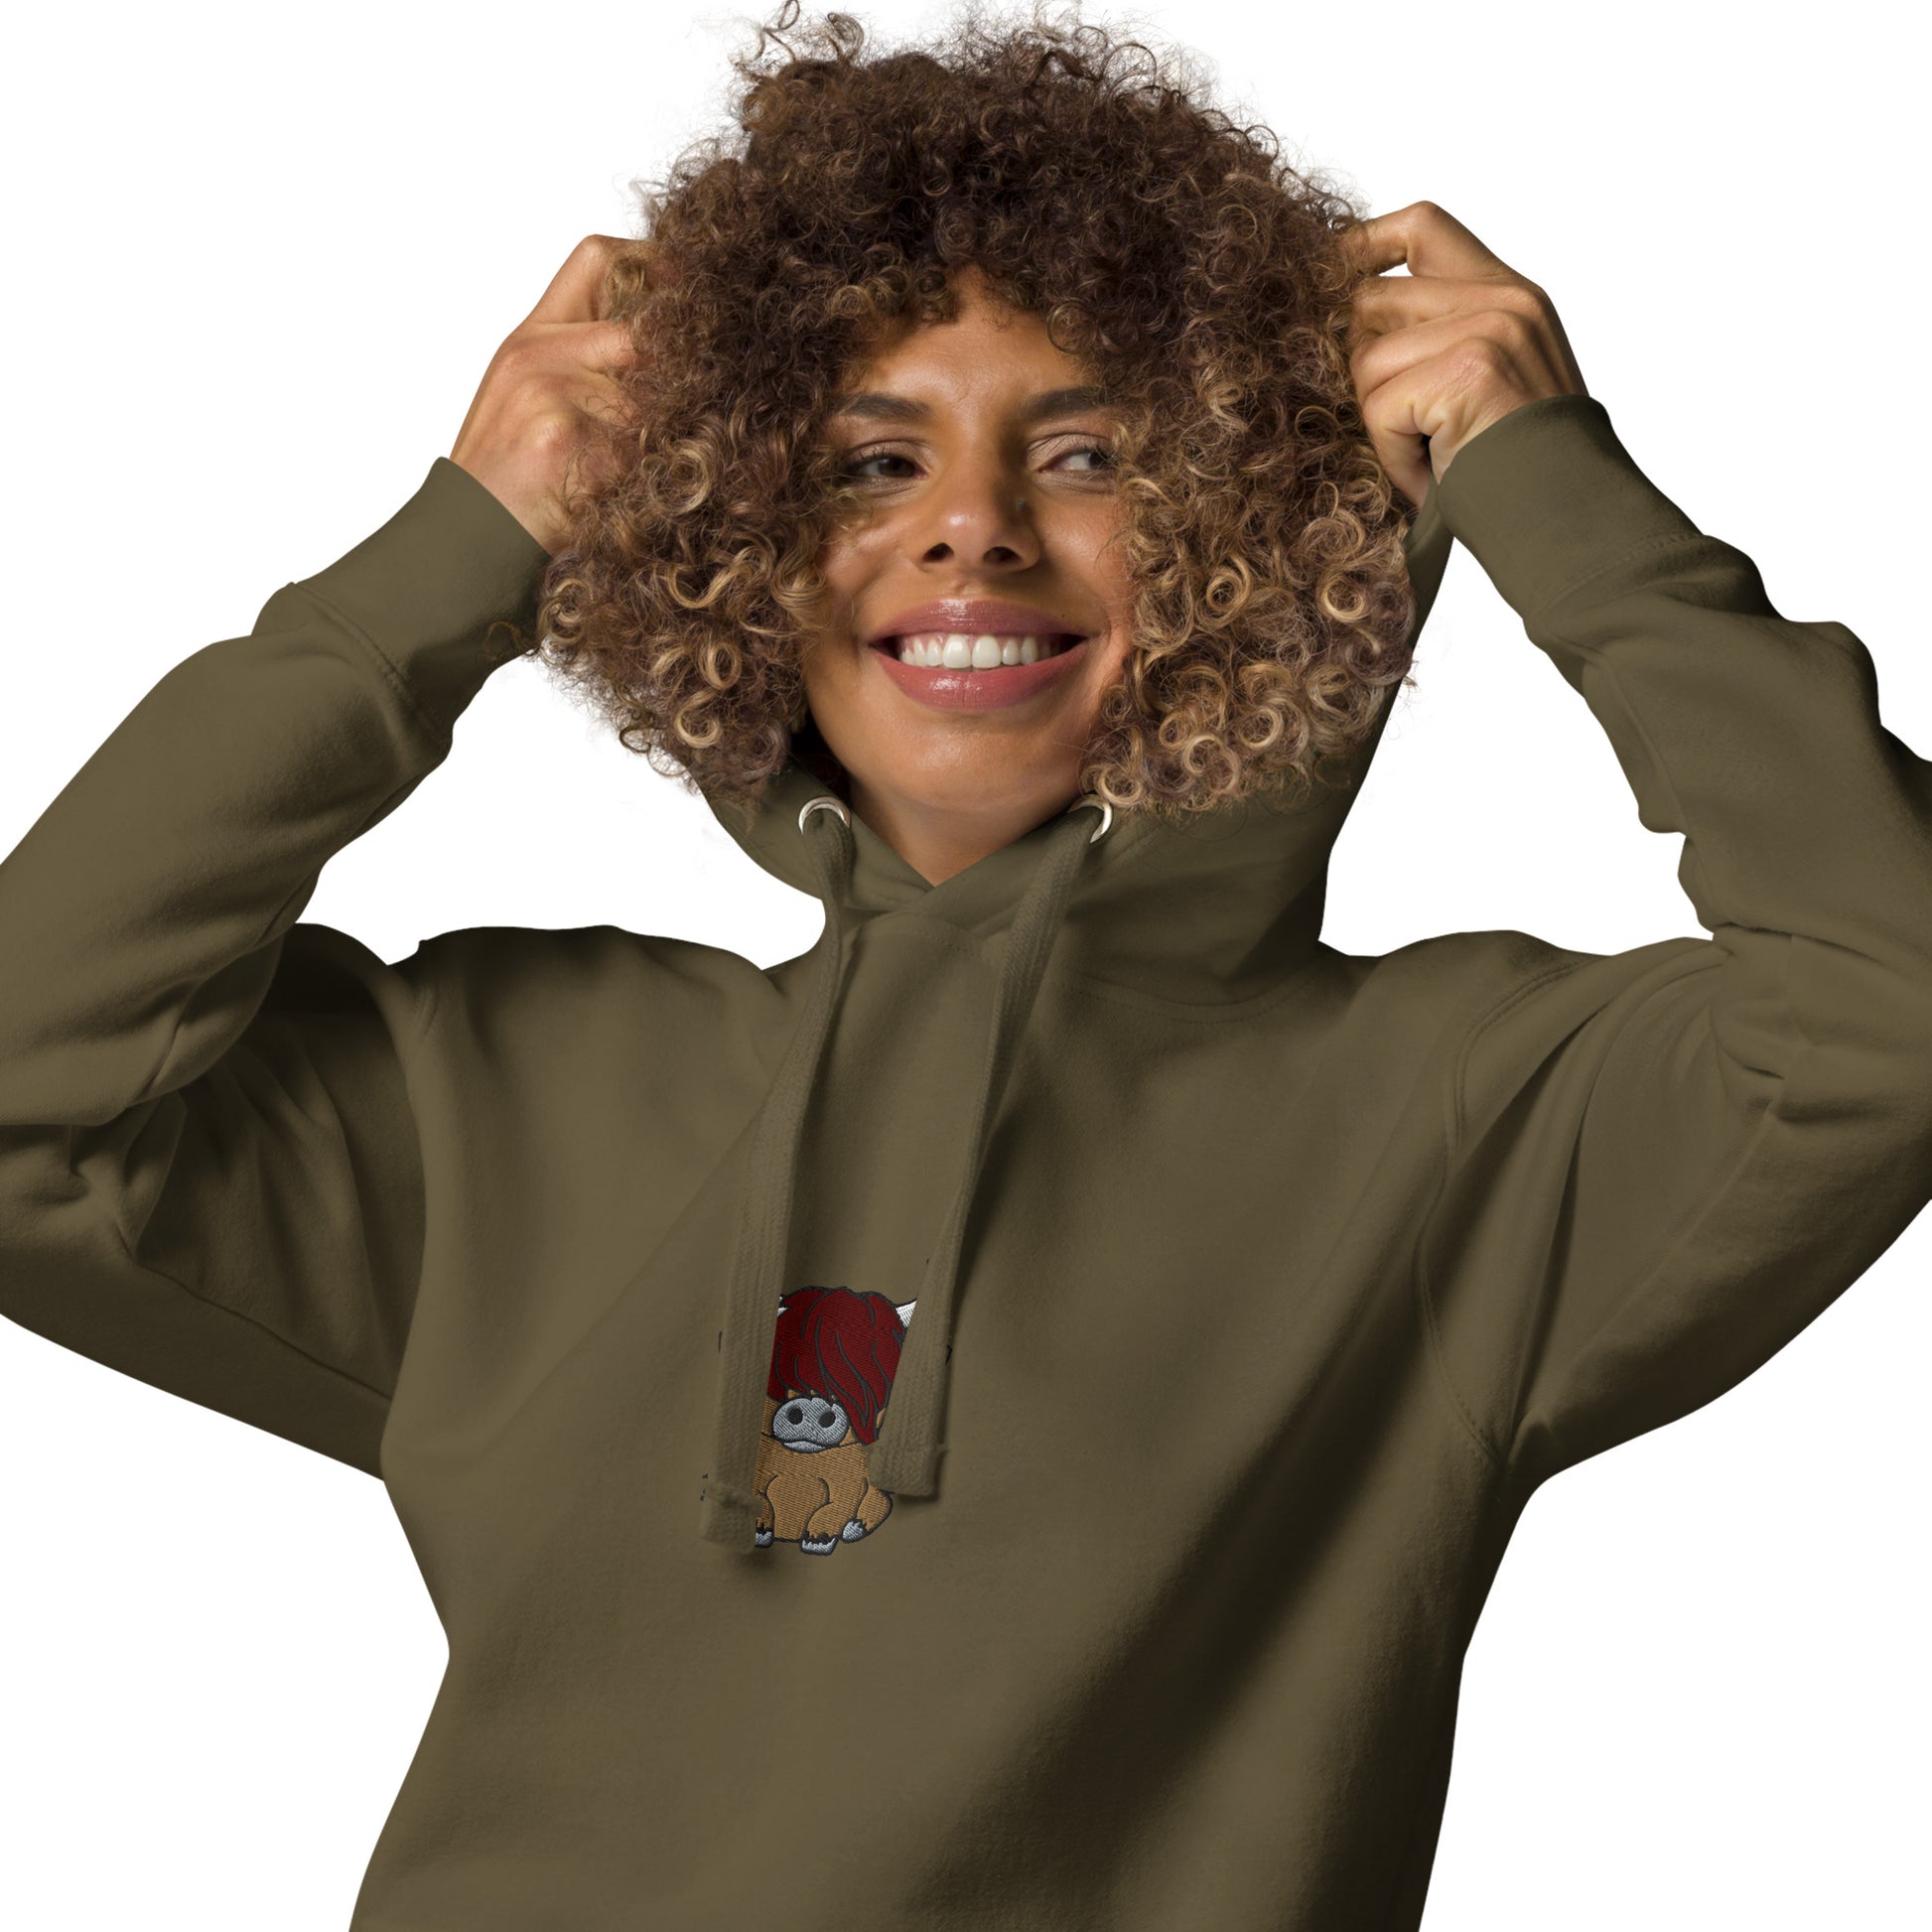 Scottish Higland Cow Embroidered Hoodie - The Global Wanderer